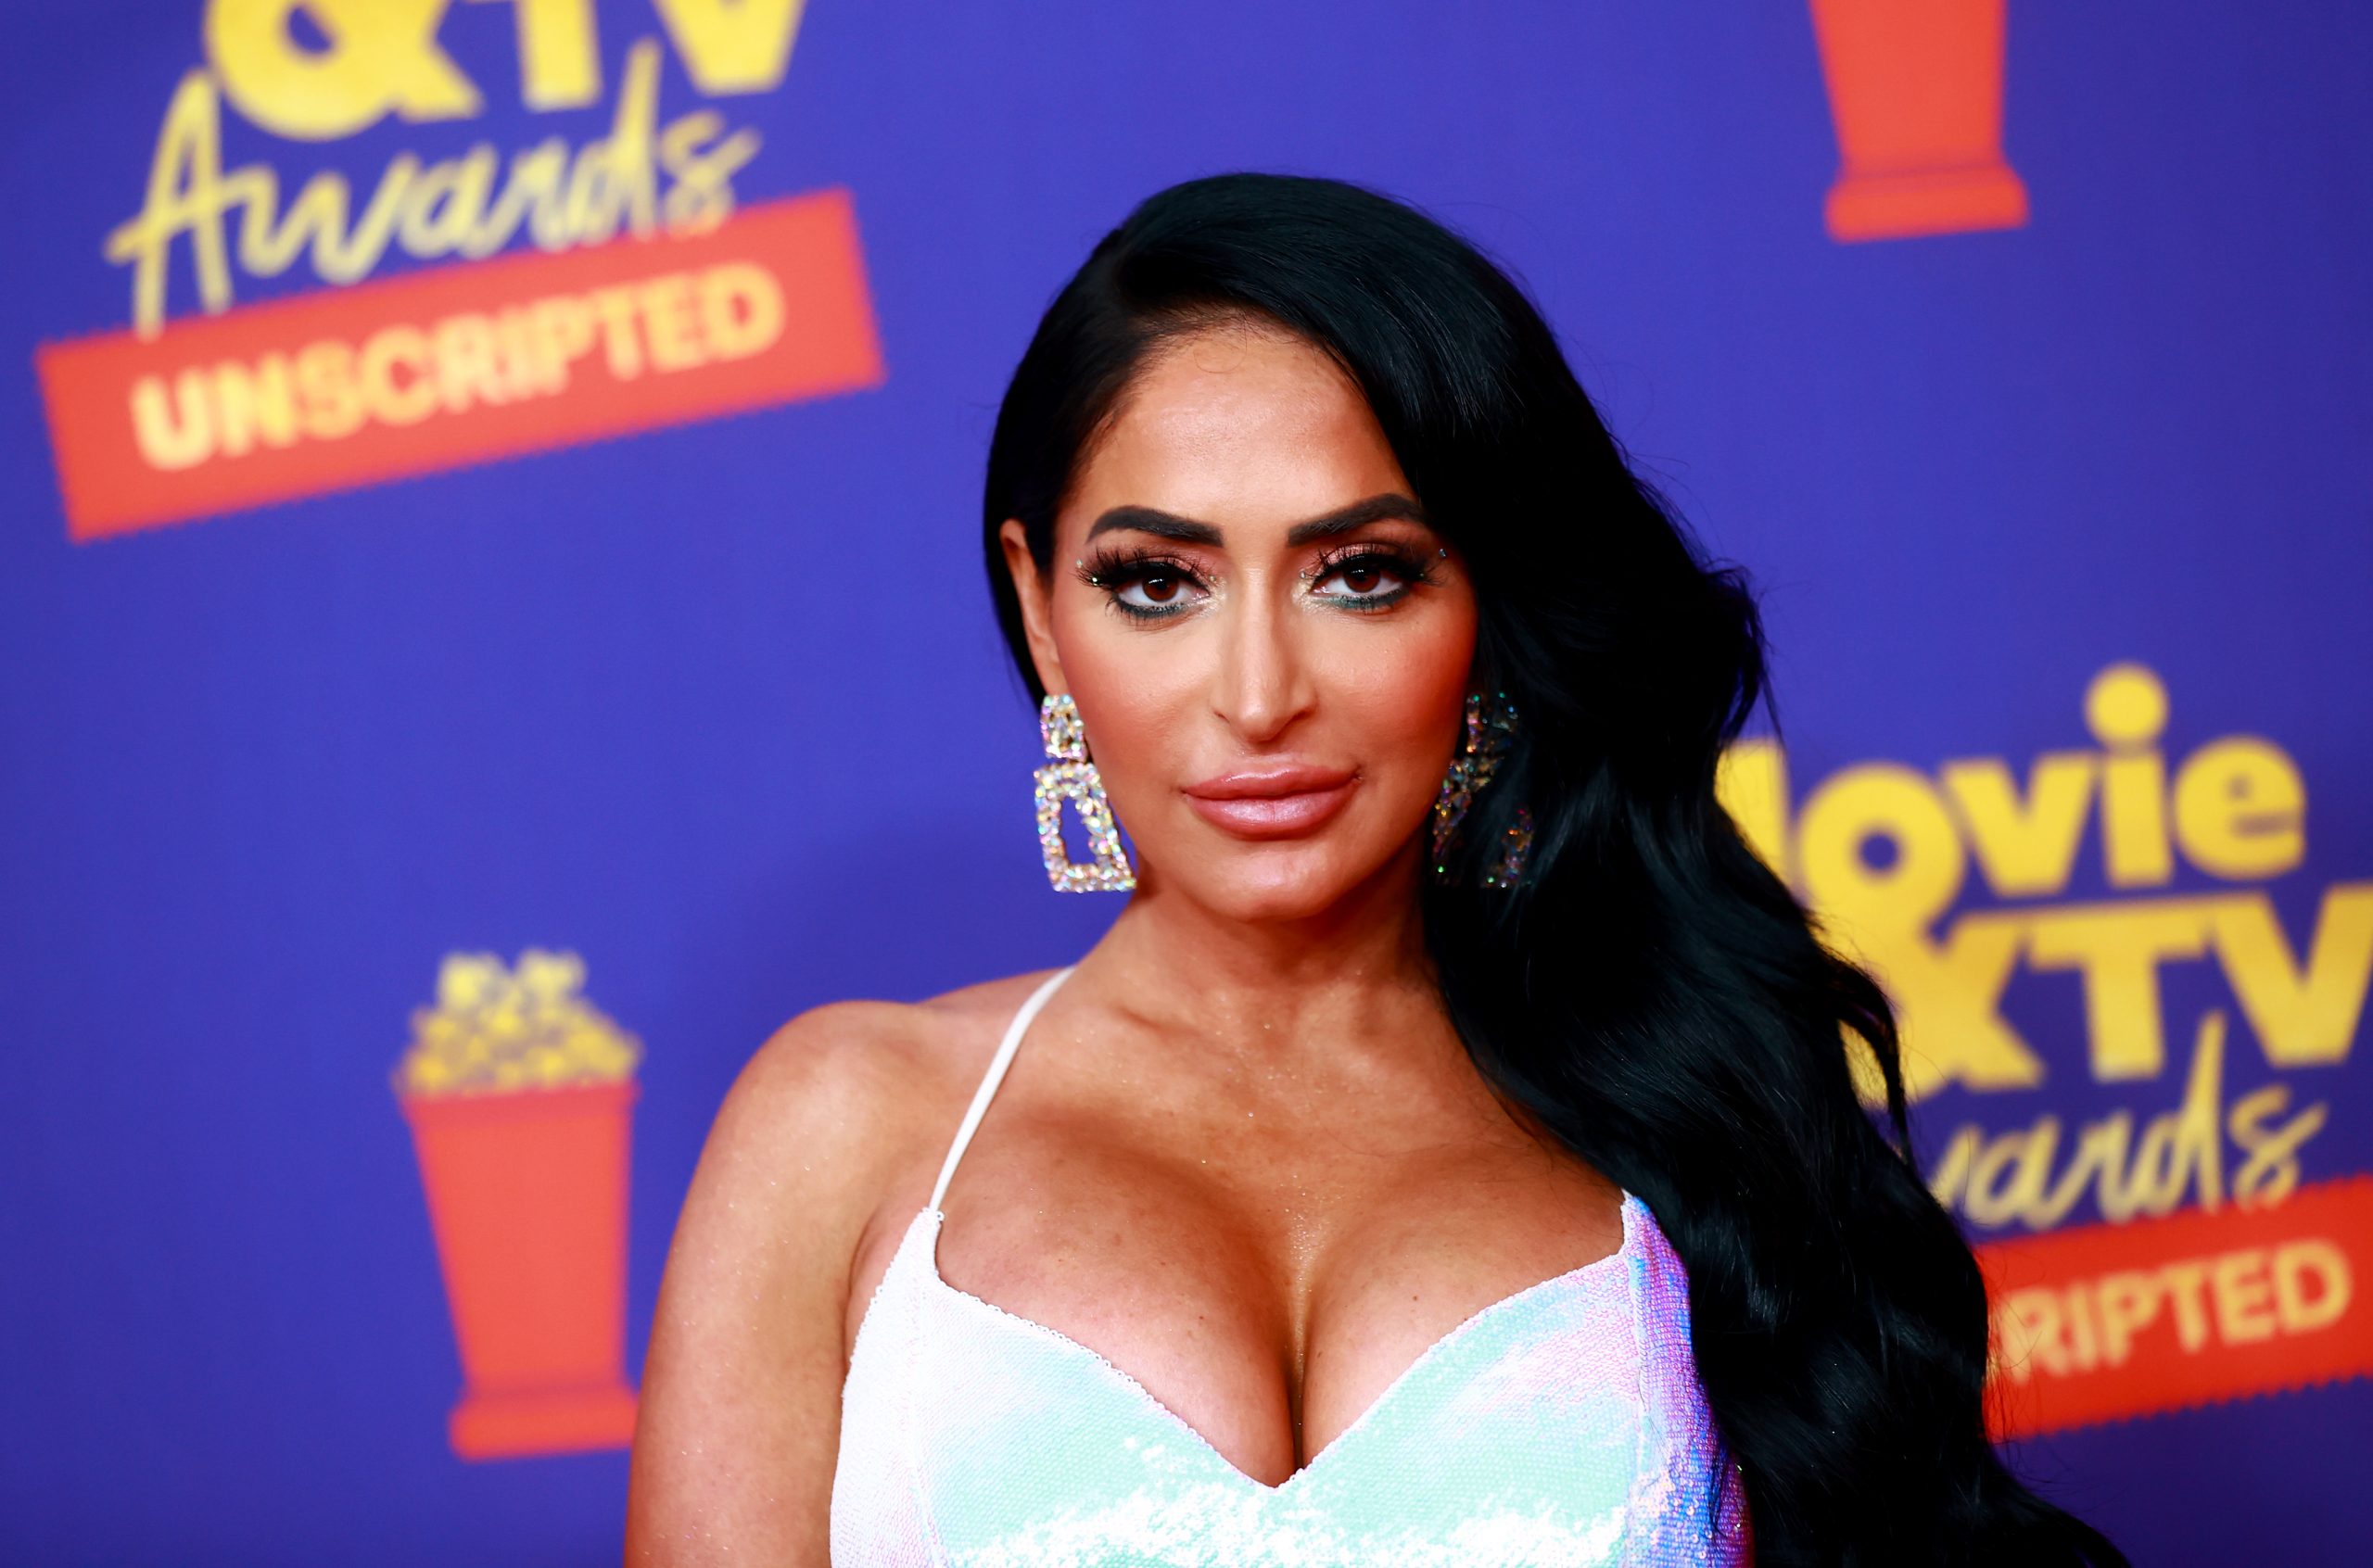 Jersey Shore Star Angelina Pivarnick Love Island Alums Part Of All Star Shore Cast